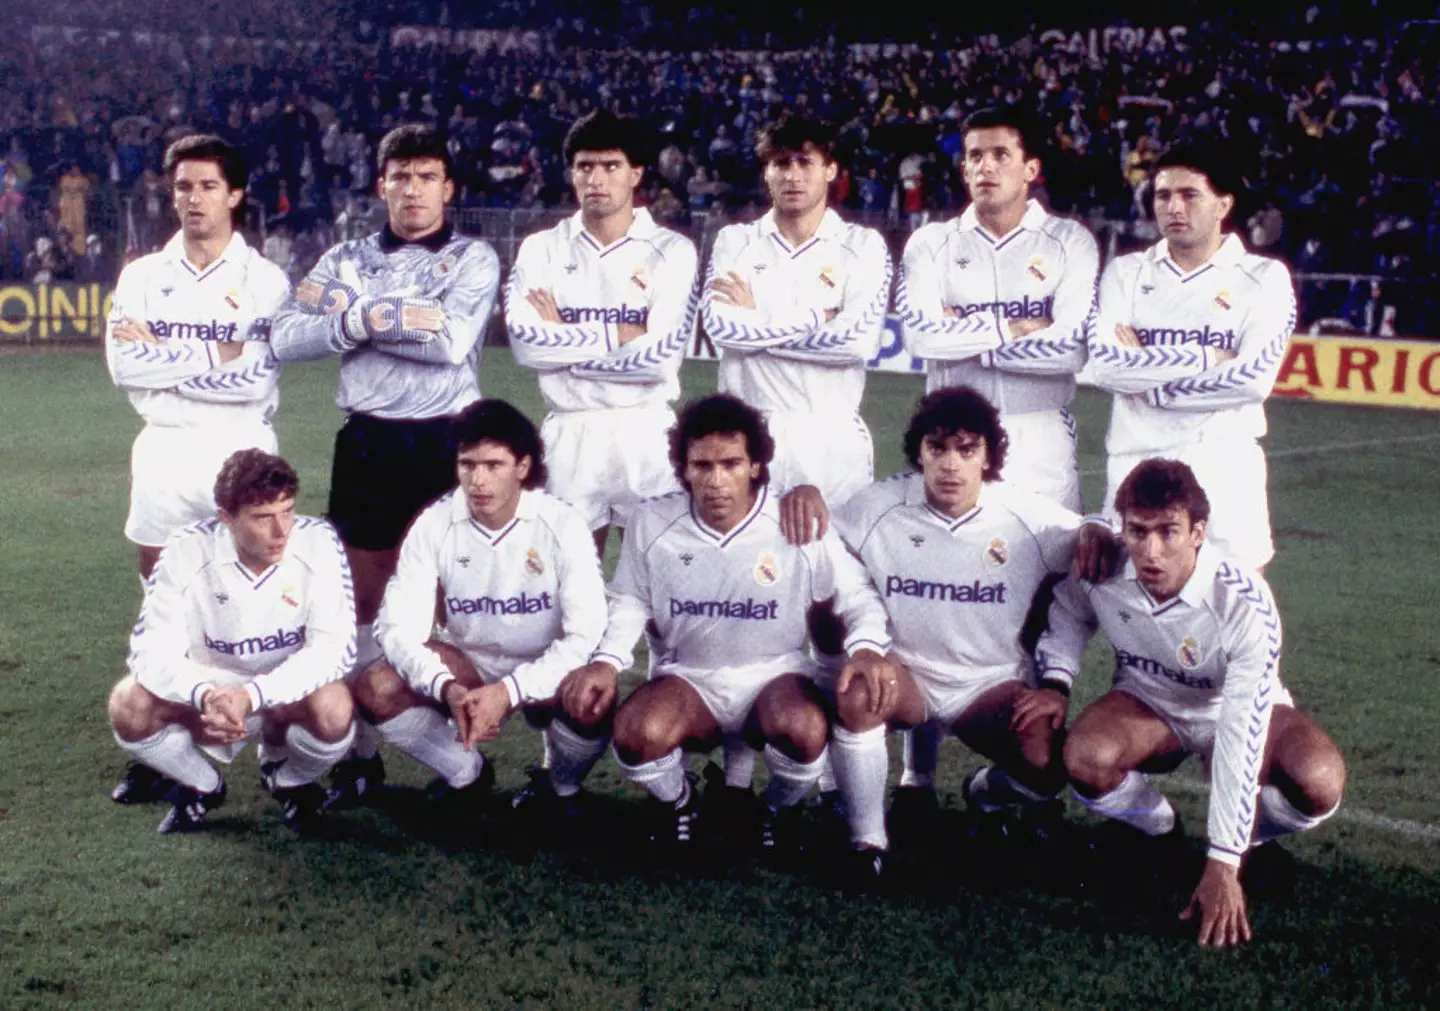 Real Madrid team in 1987 (